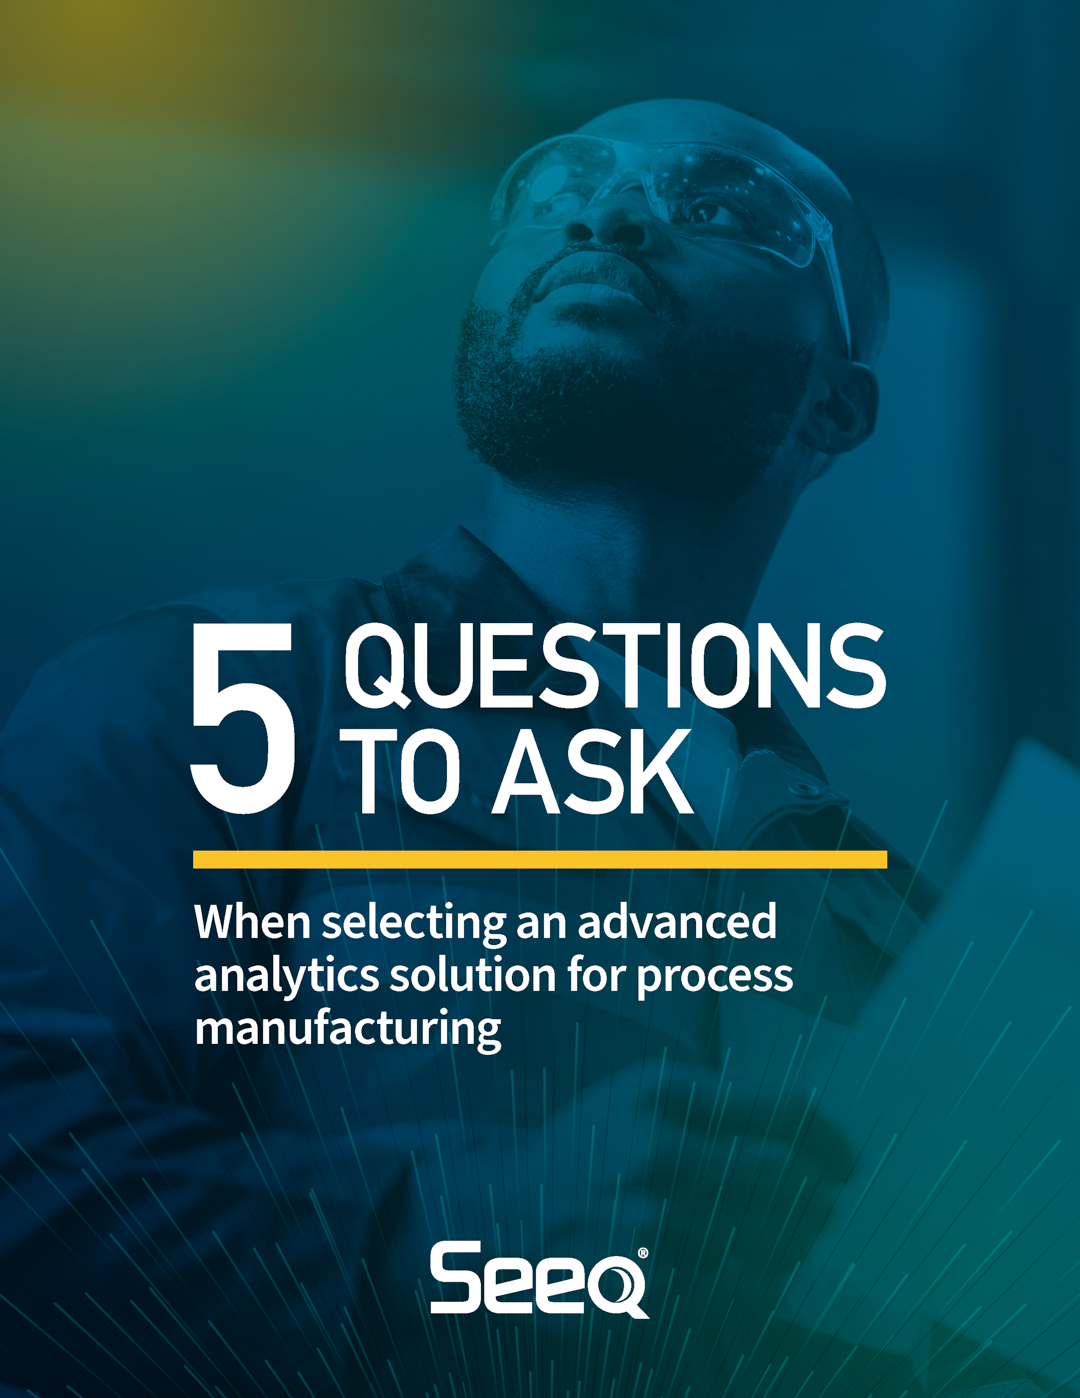 5 Questions to Ask When Selecting an Advanced Analytics Solution for Process Manufacturing